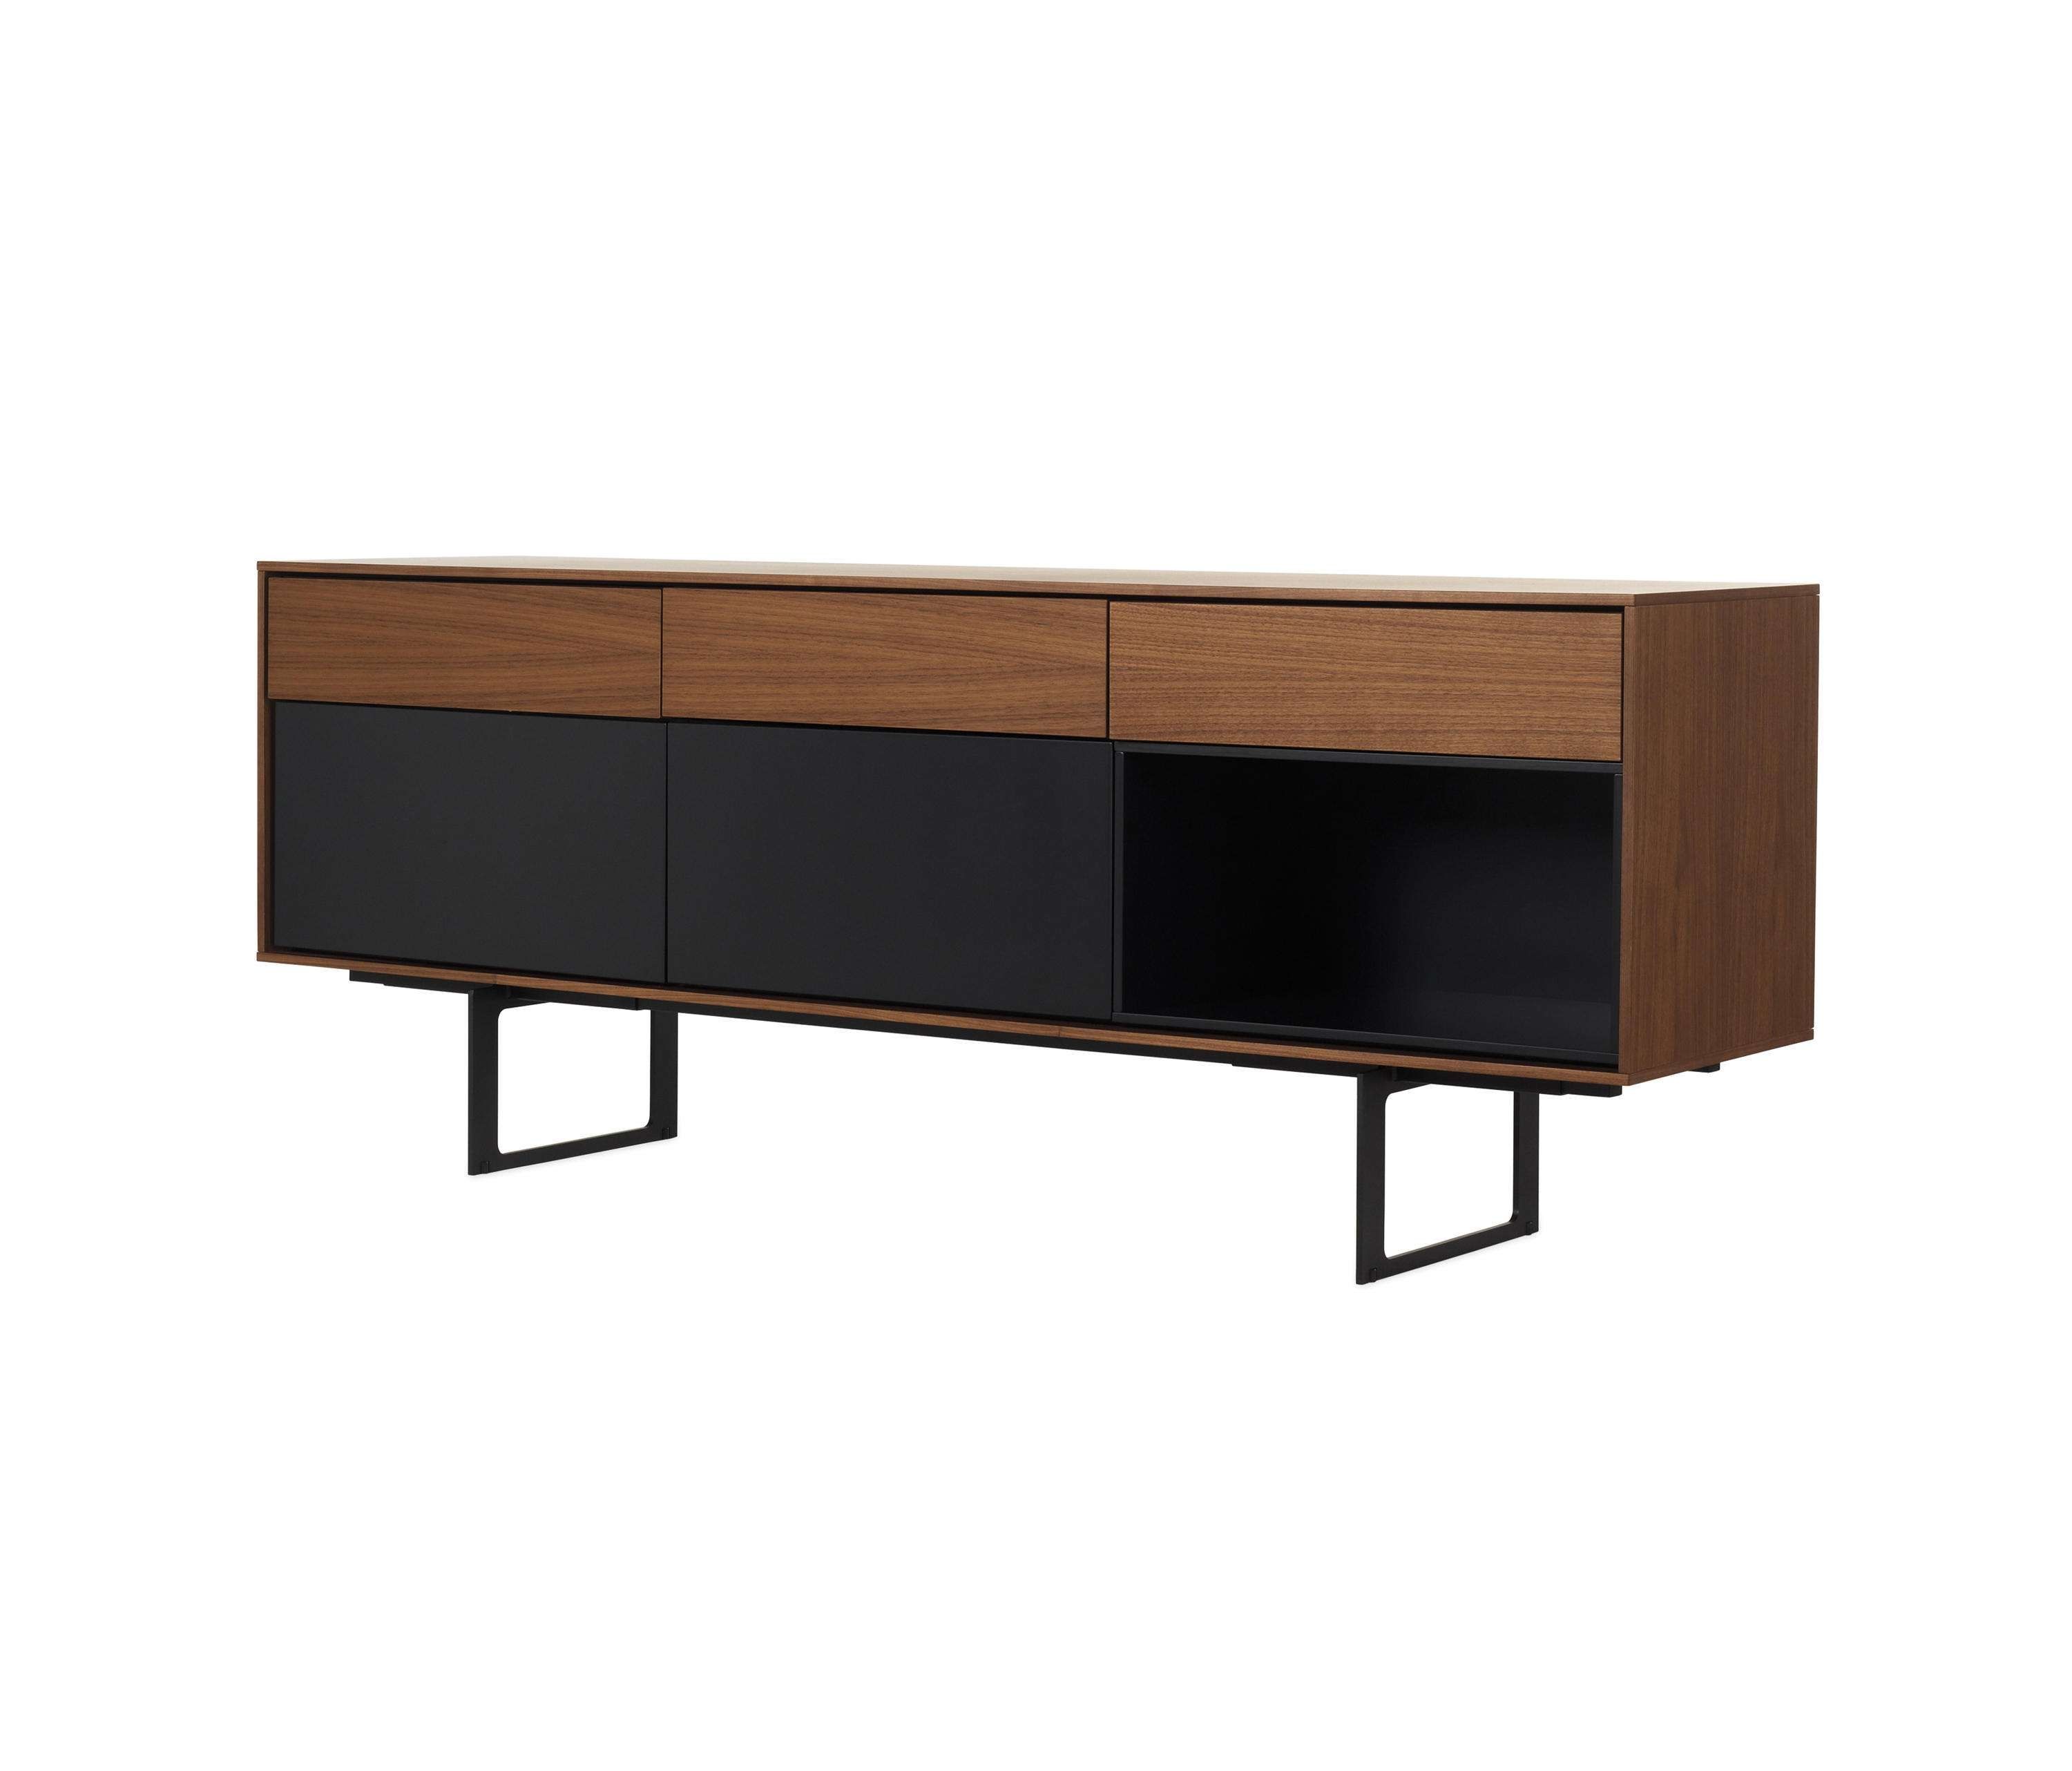 Aura Credenza – Sideboards From Design Within Reach | Architonic Intended For Credenza Sideboards (View 9 of 20)